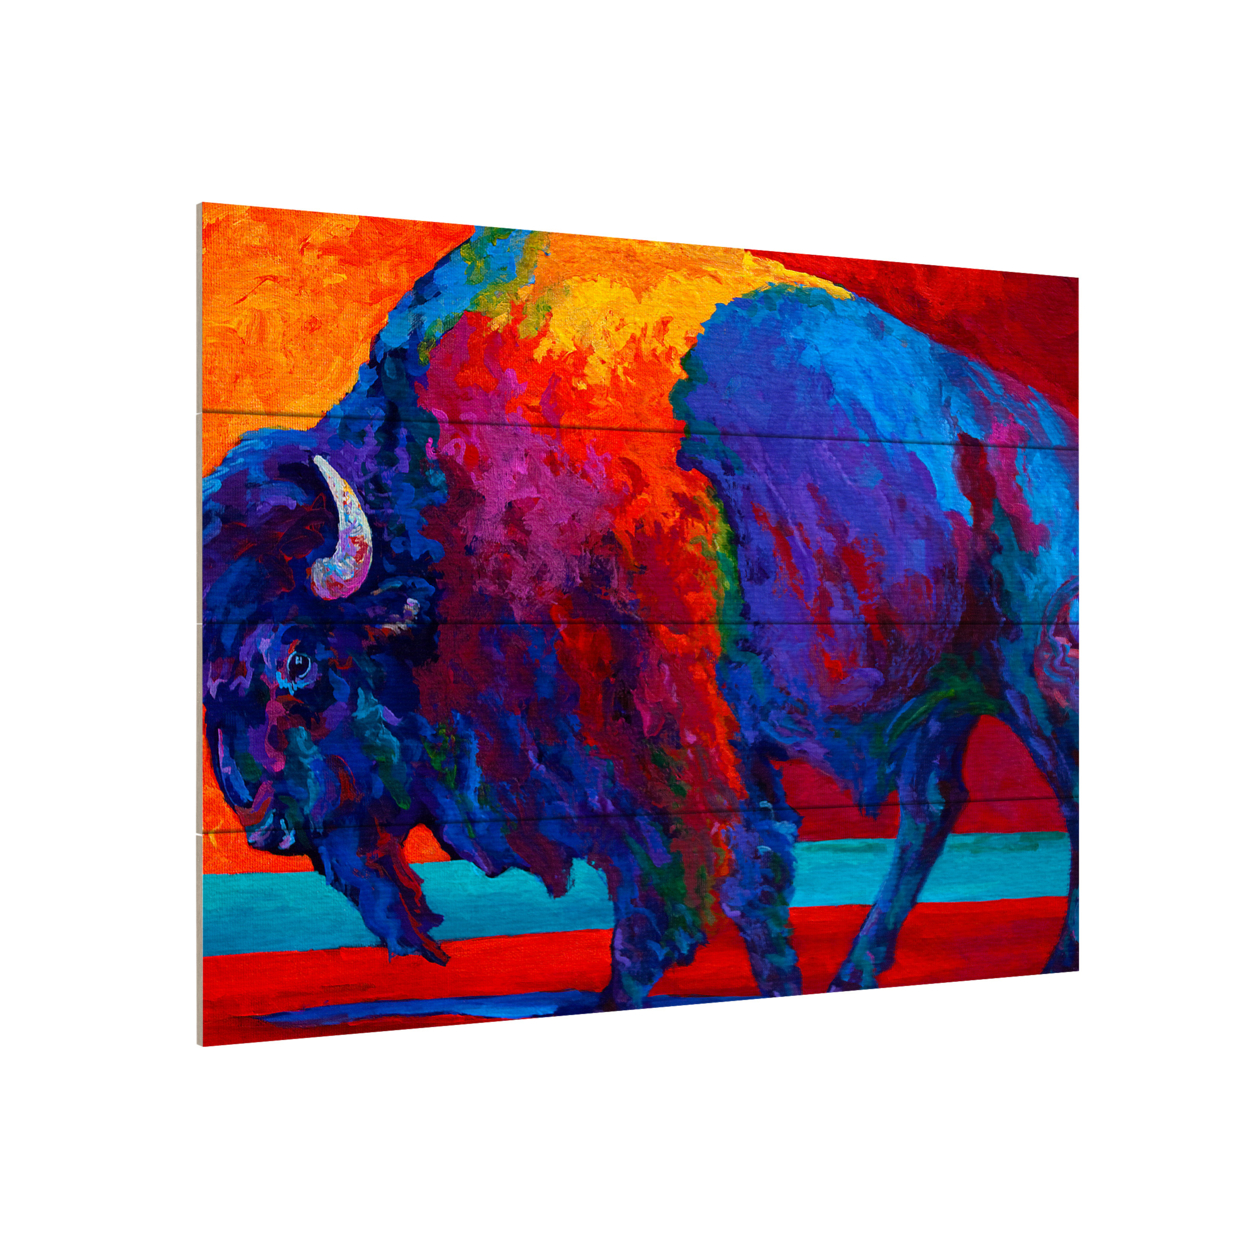 Wall Art 12 X 16 Inches Titled Abstract Bison Ready To Hang Printed On Wooden Planks